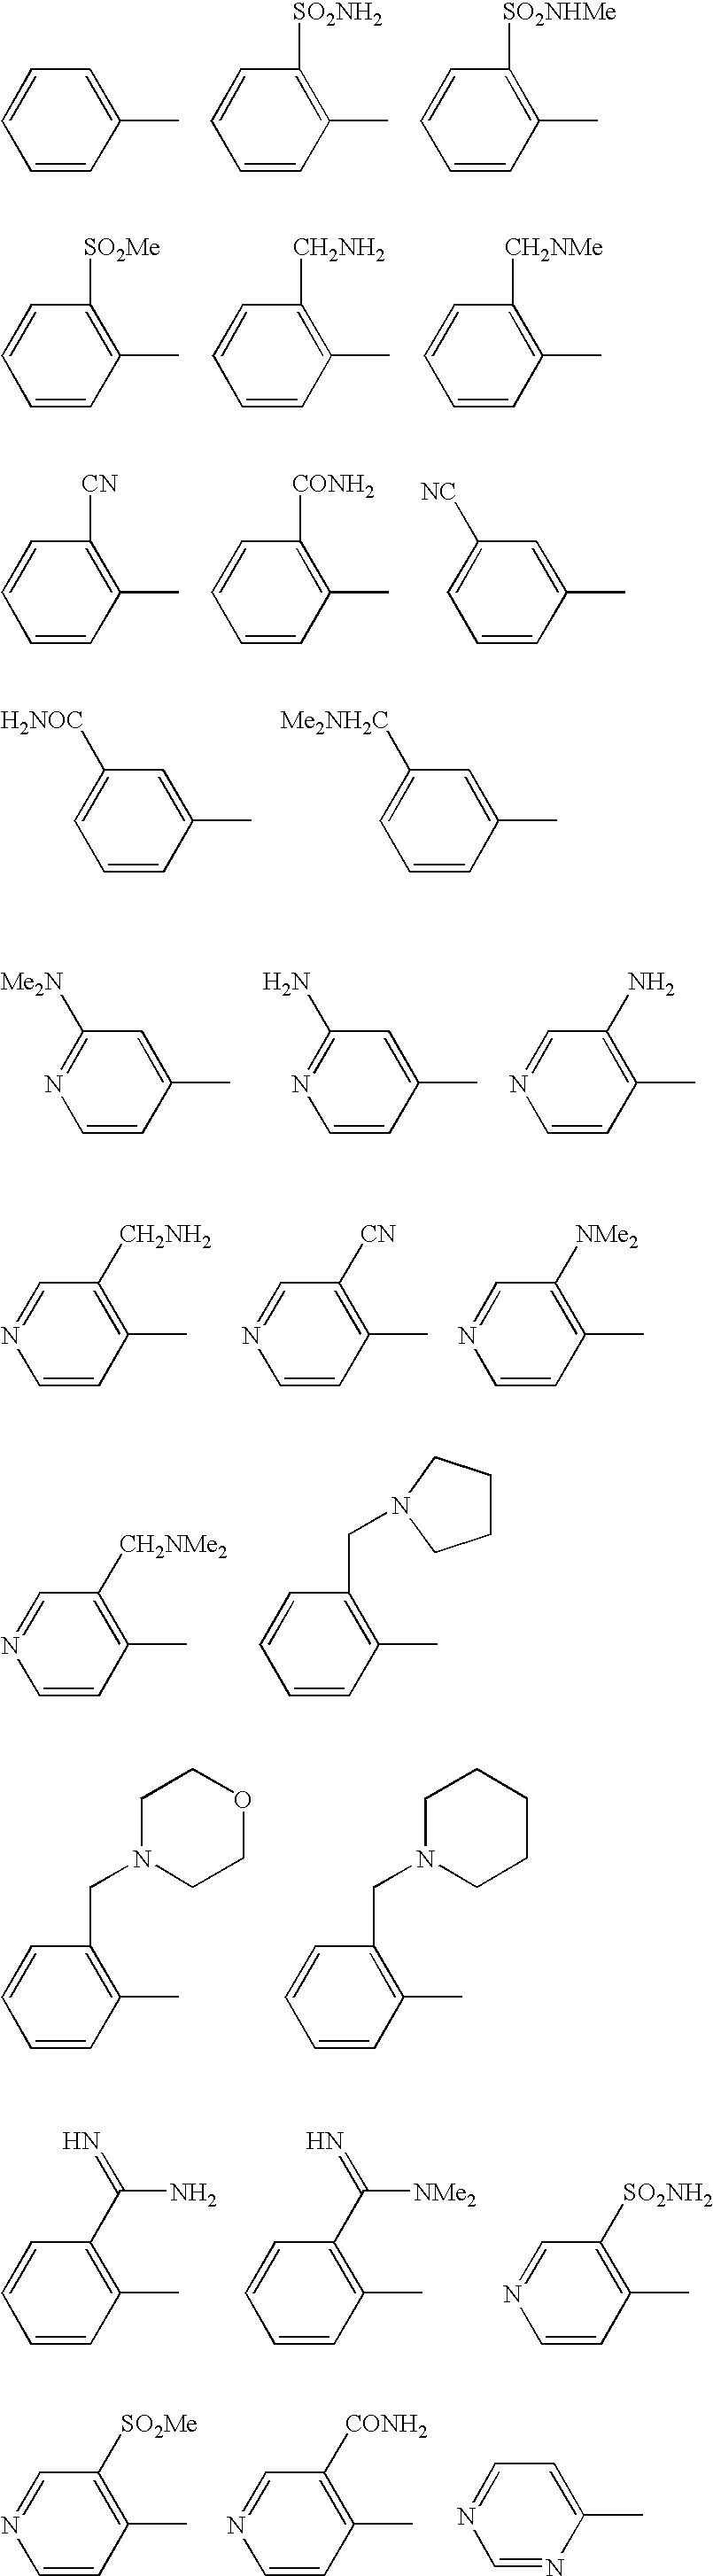 Benzamides and related inhibitors of factor Xa